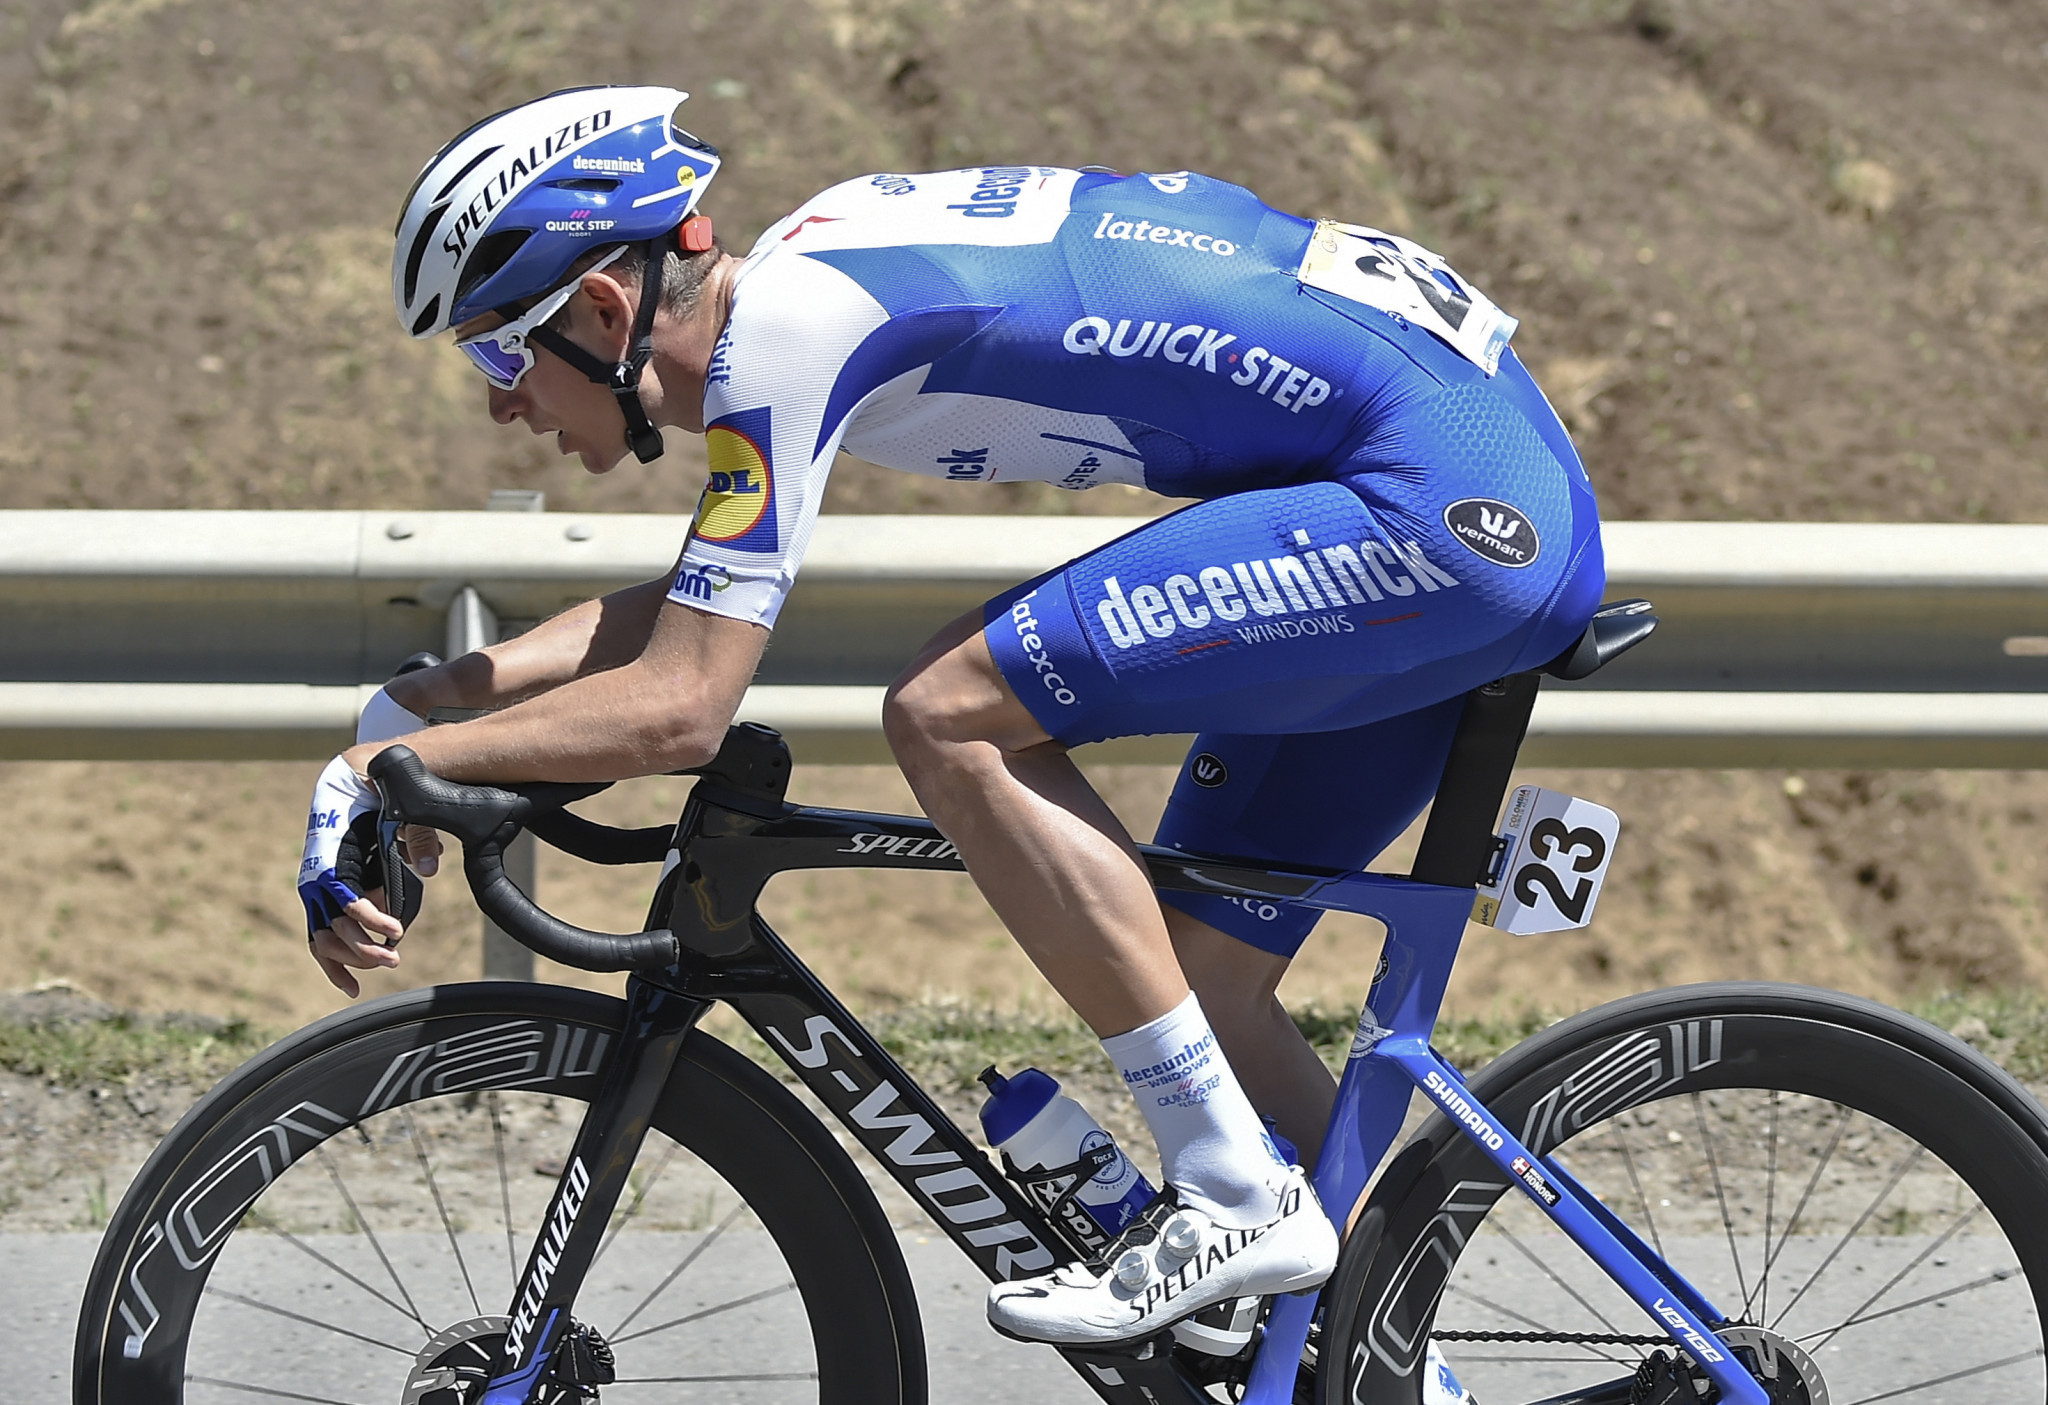 Deceuninck-QuickStep enjoy one-two on fifth stage of Tour of the Basque Country